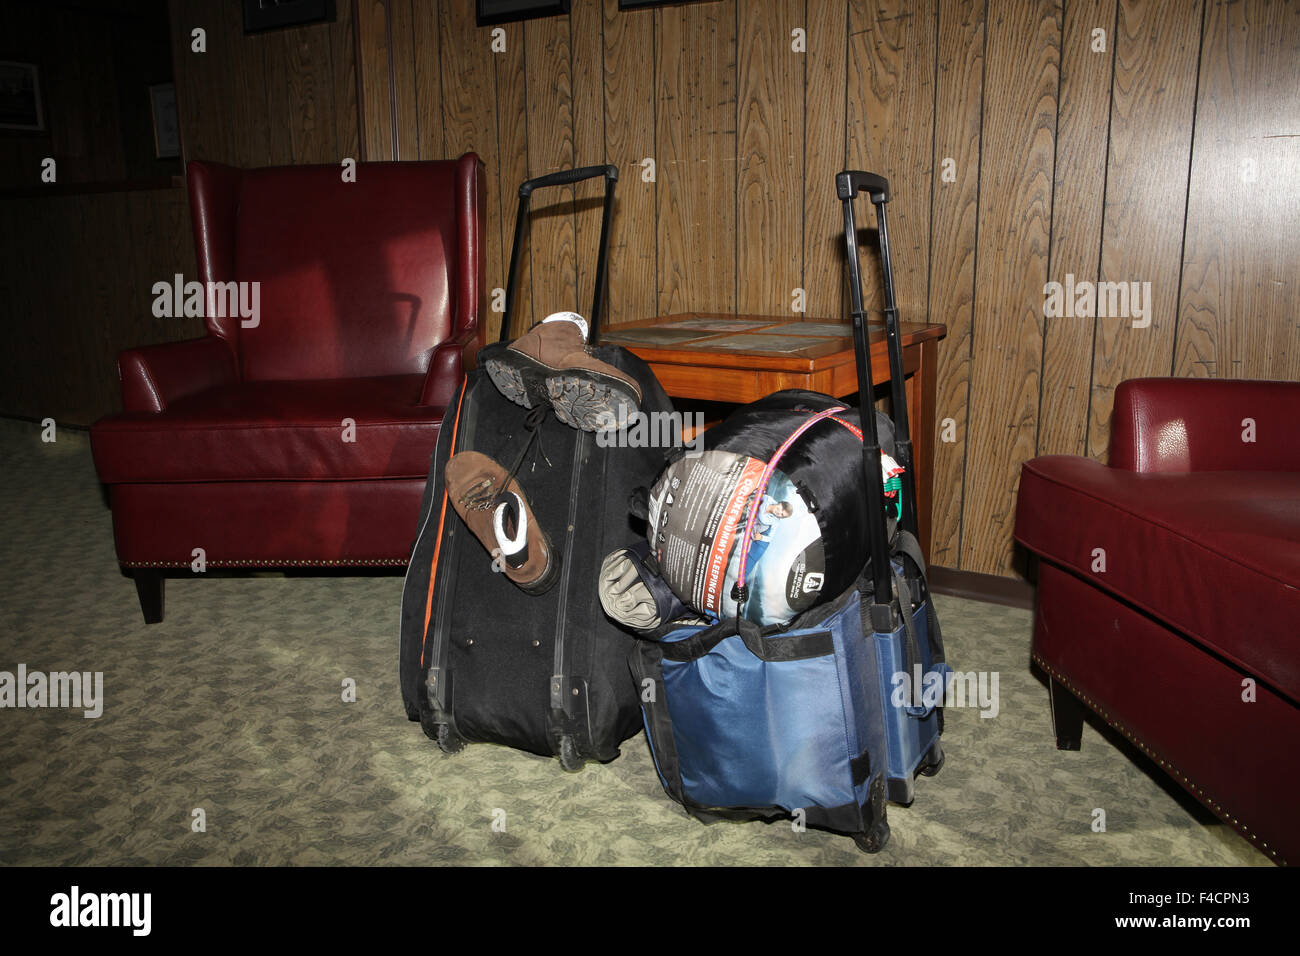 Back packs and baggage in a hotel lobby. Stock Photo